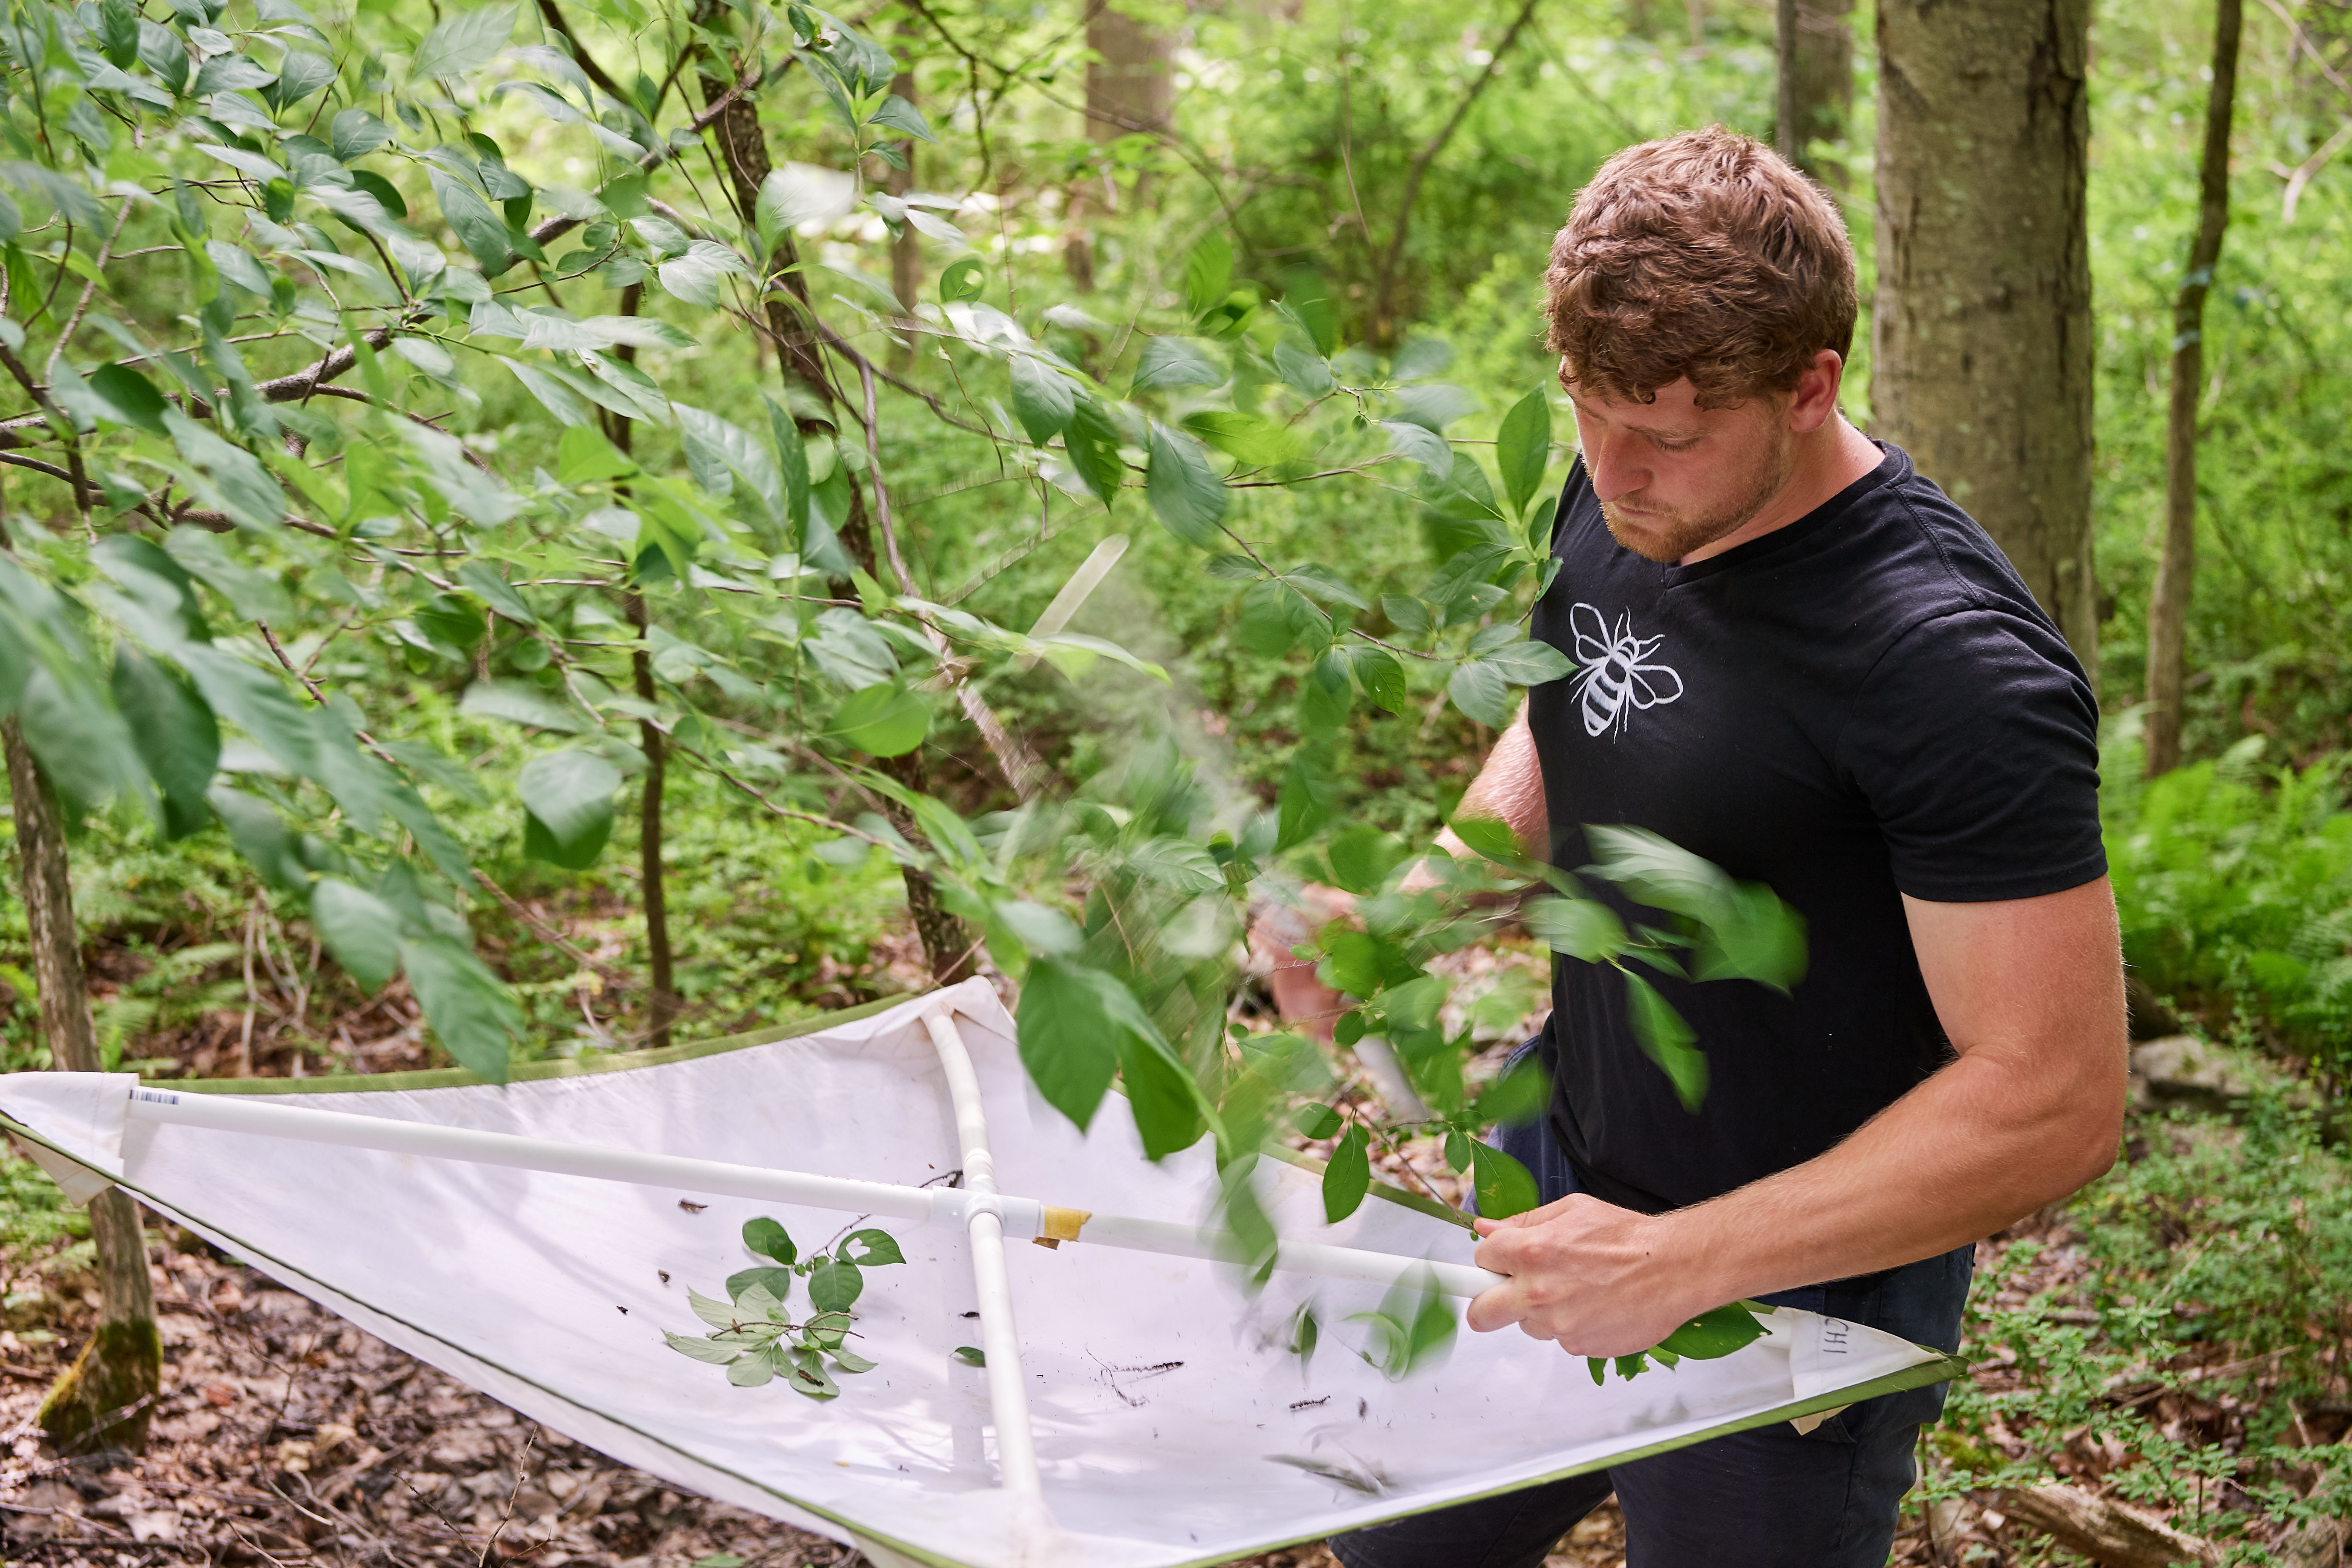 Christian Connors '20 (CLAS) collects caterpillars near Dog Lane in Storrs on July 11, 2019. (Peter Morenus/UConn Photo)